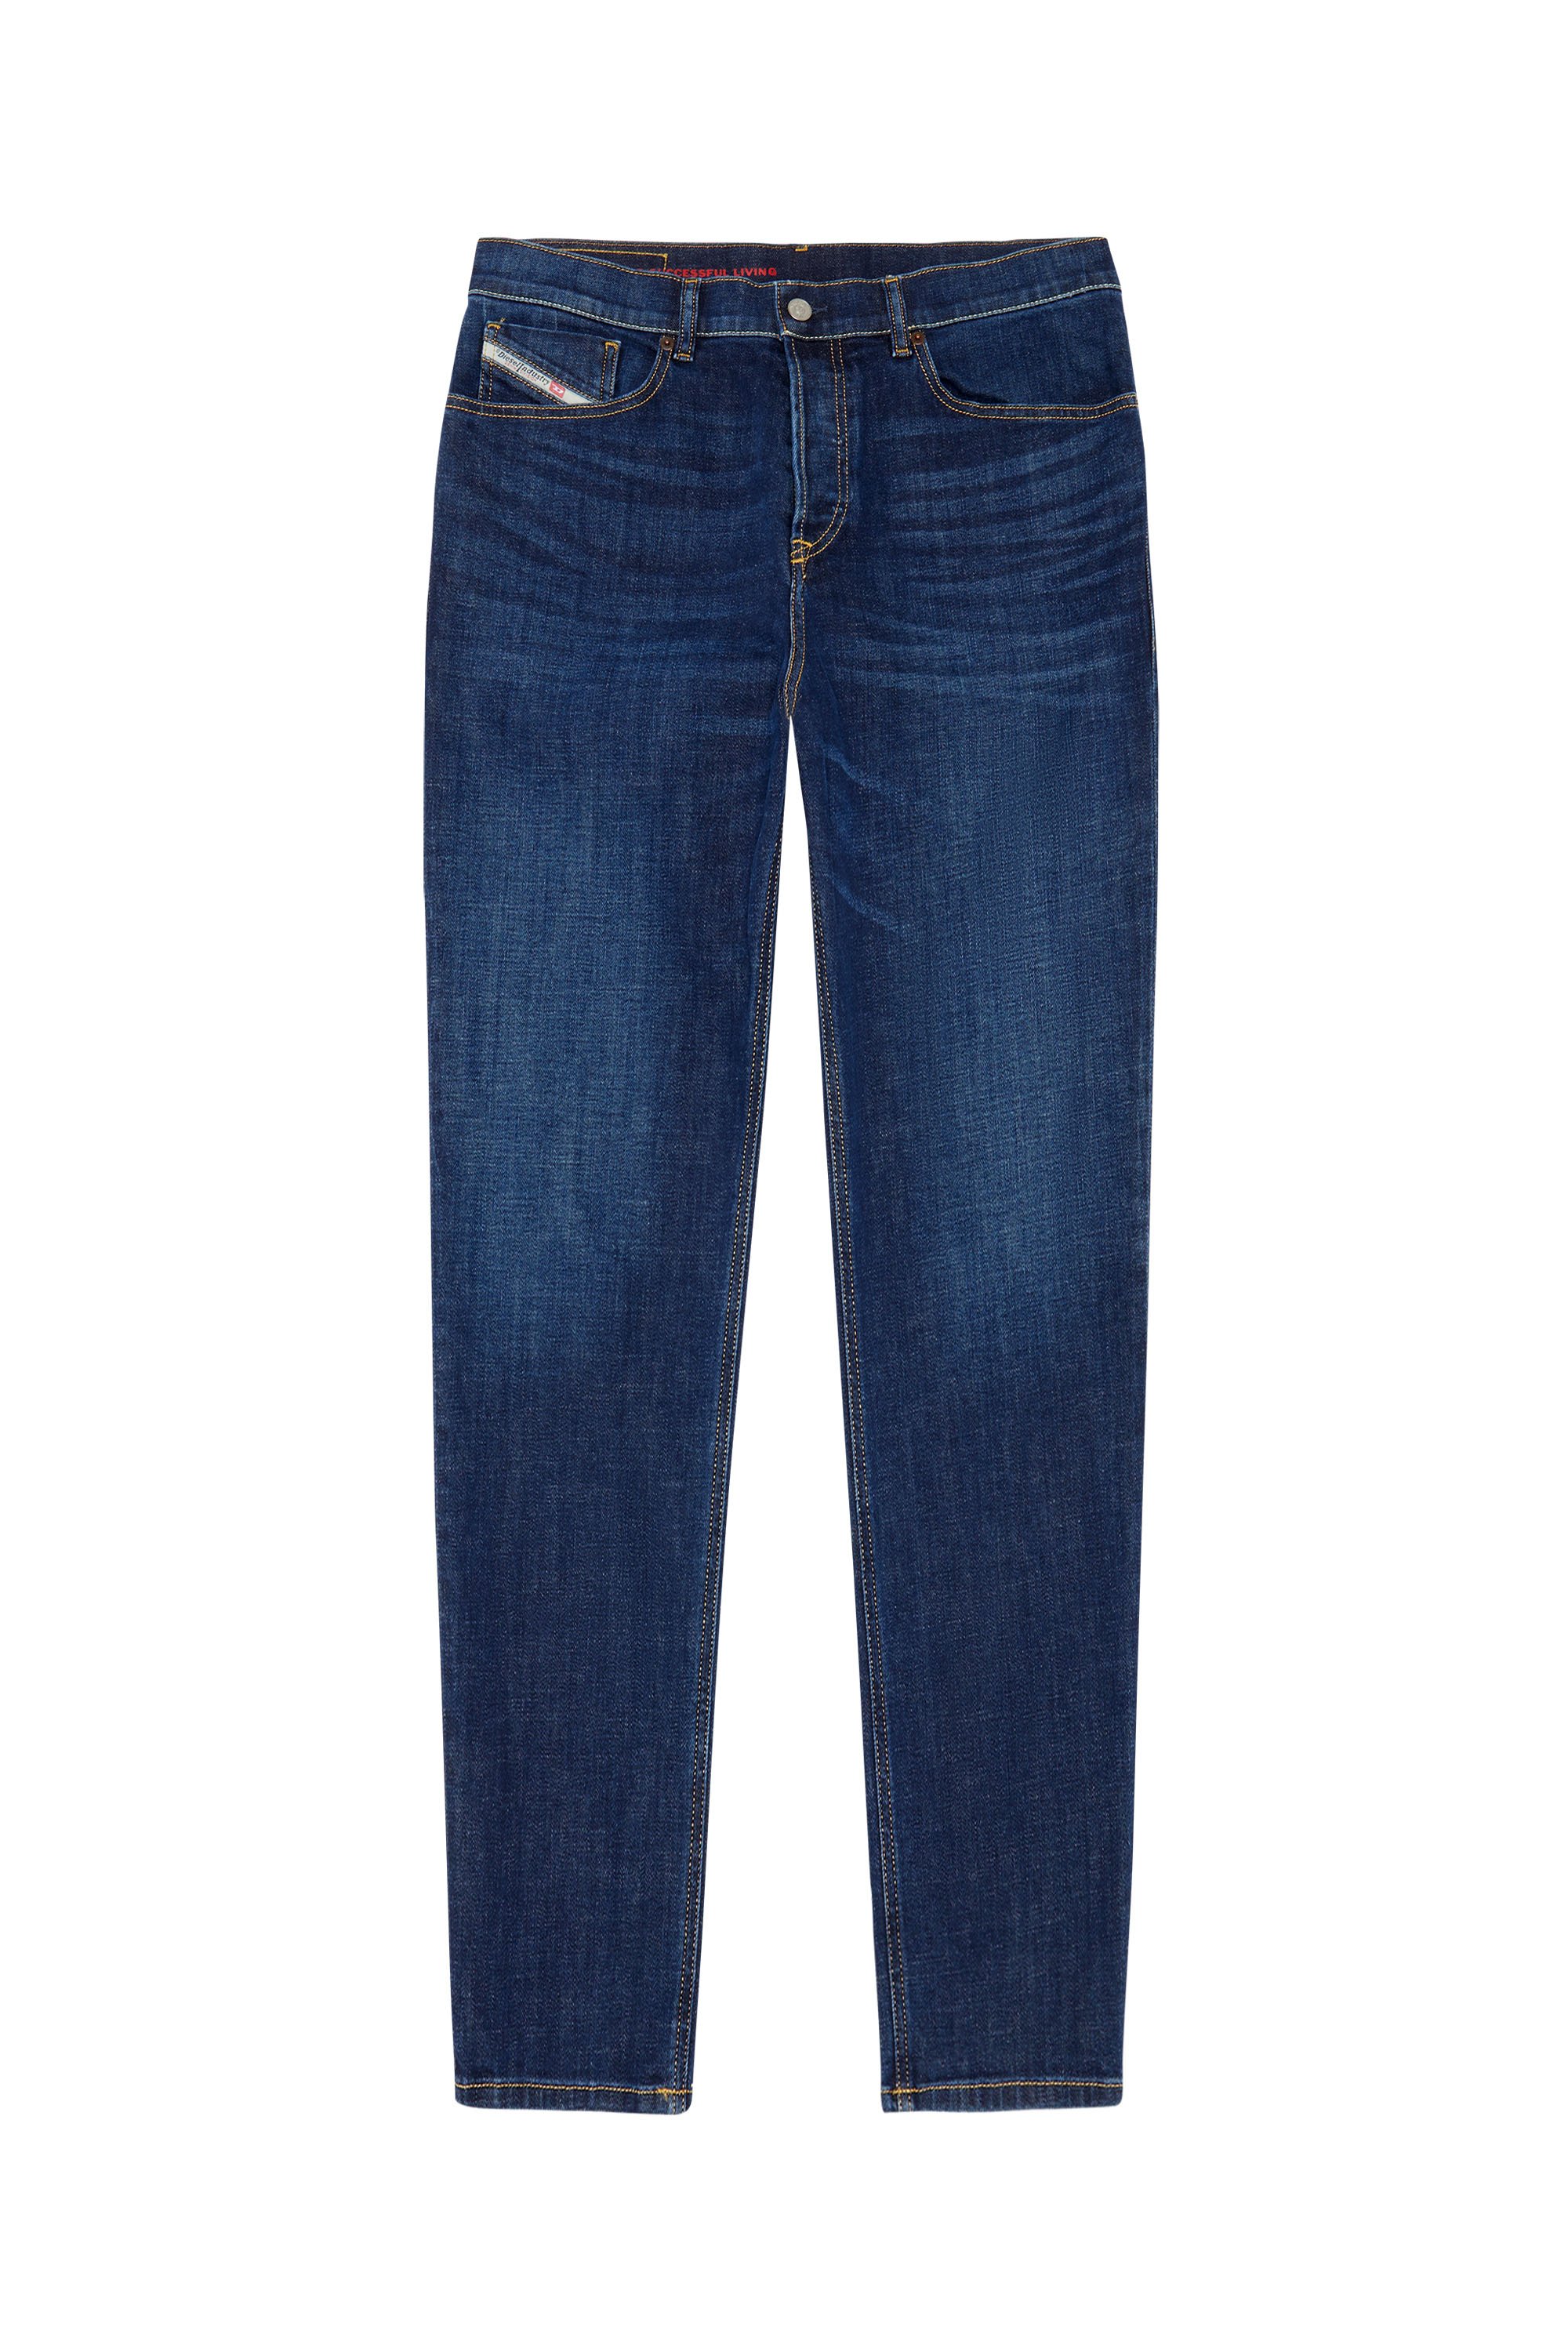 2005 D-FINING 09B90 Tapered Jeans, Blu Scuro - Jeans